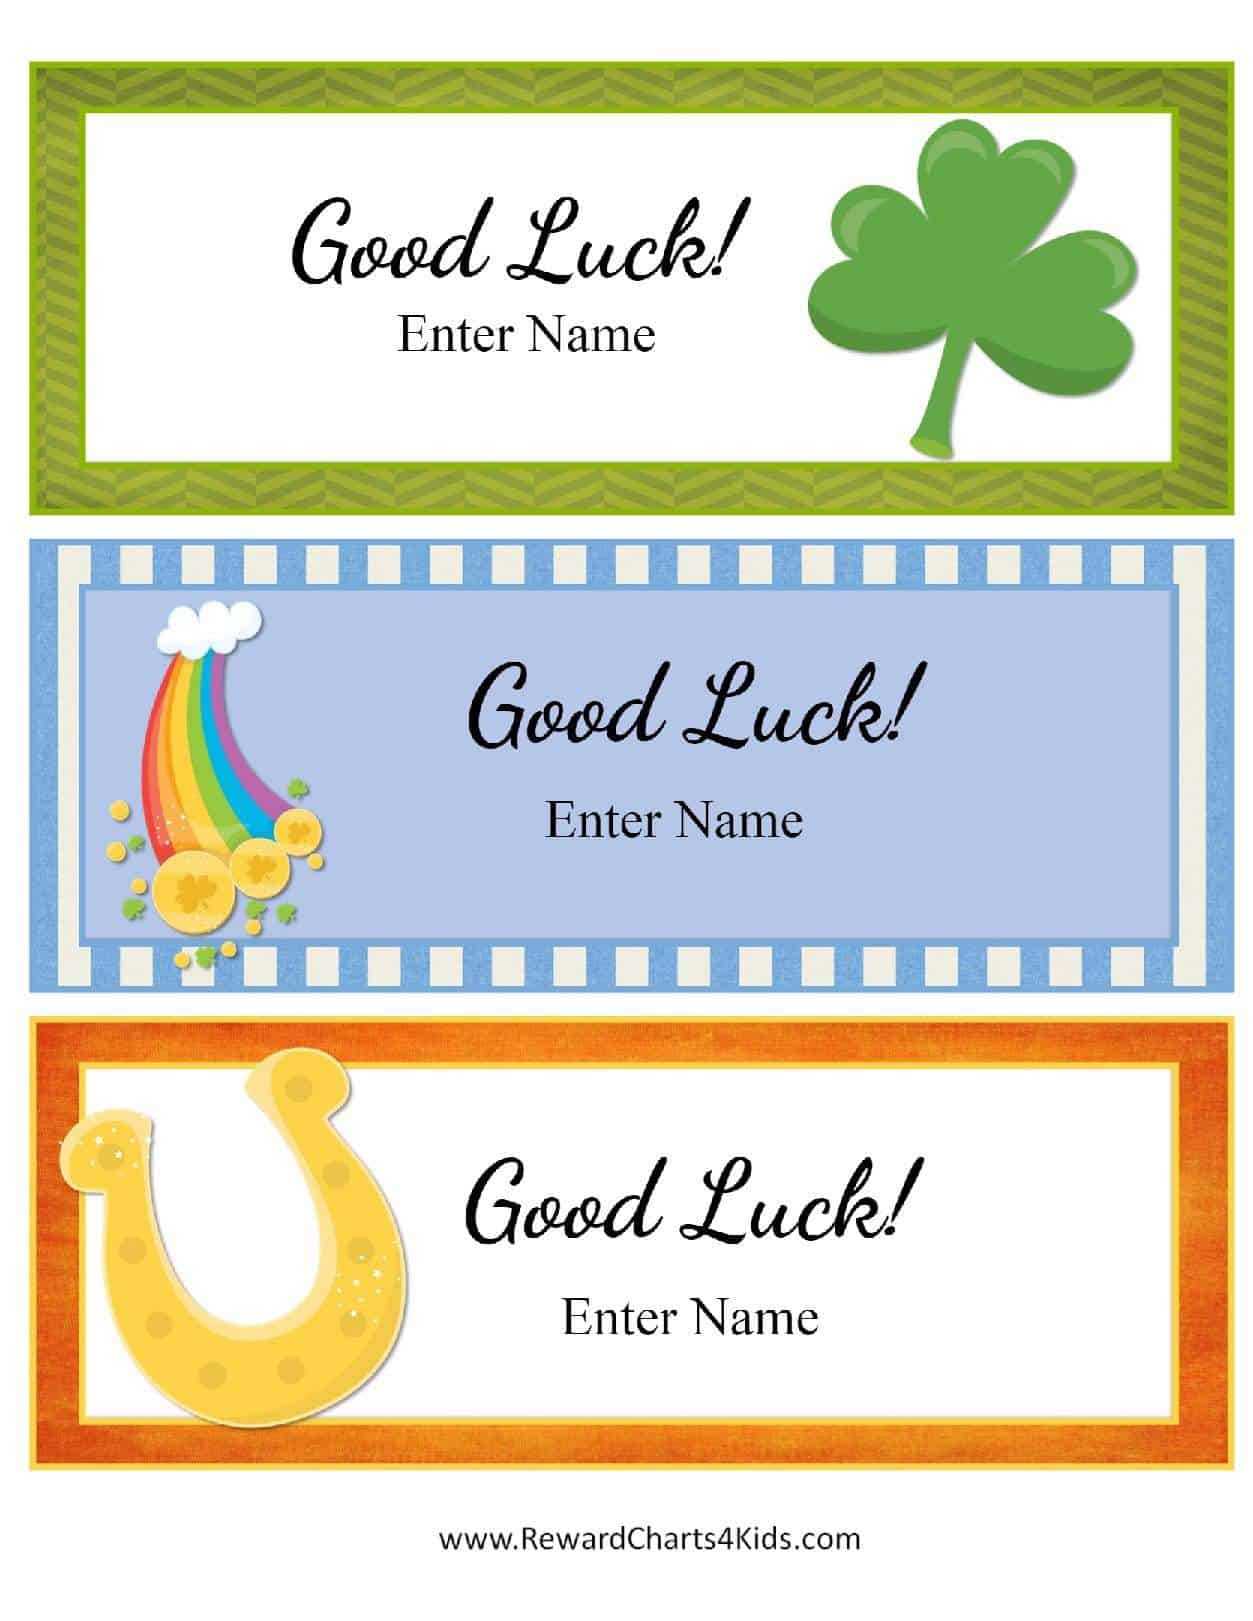 Free Good Luck Cards For Kids | Customize Online & Print At Home Intended For Good Luck Card Template